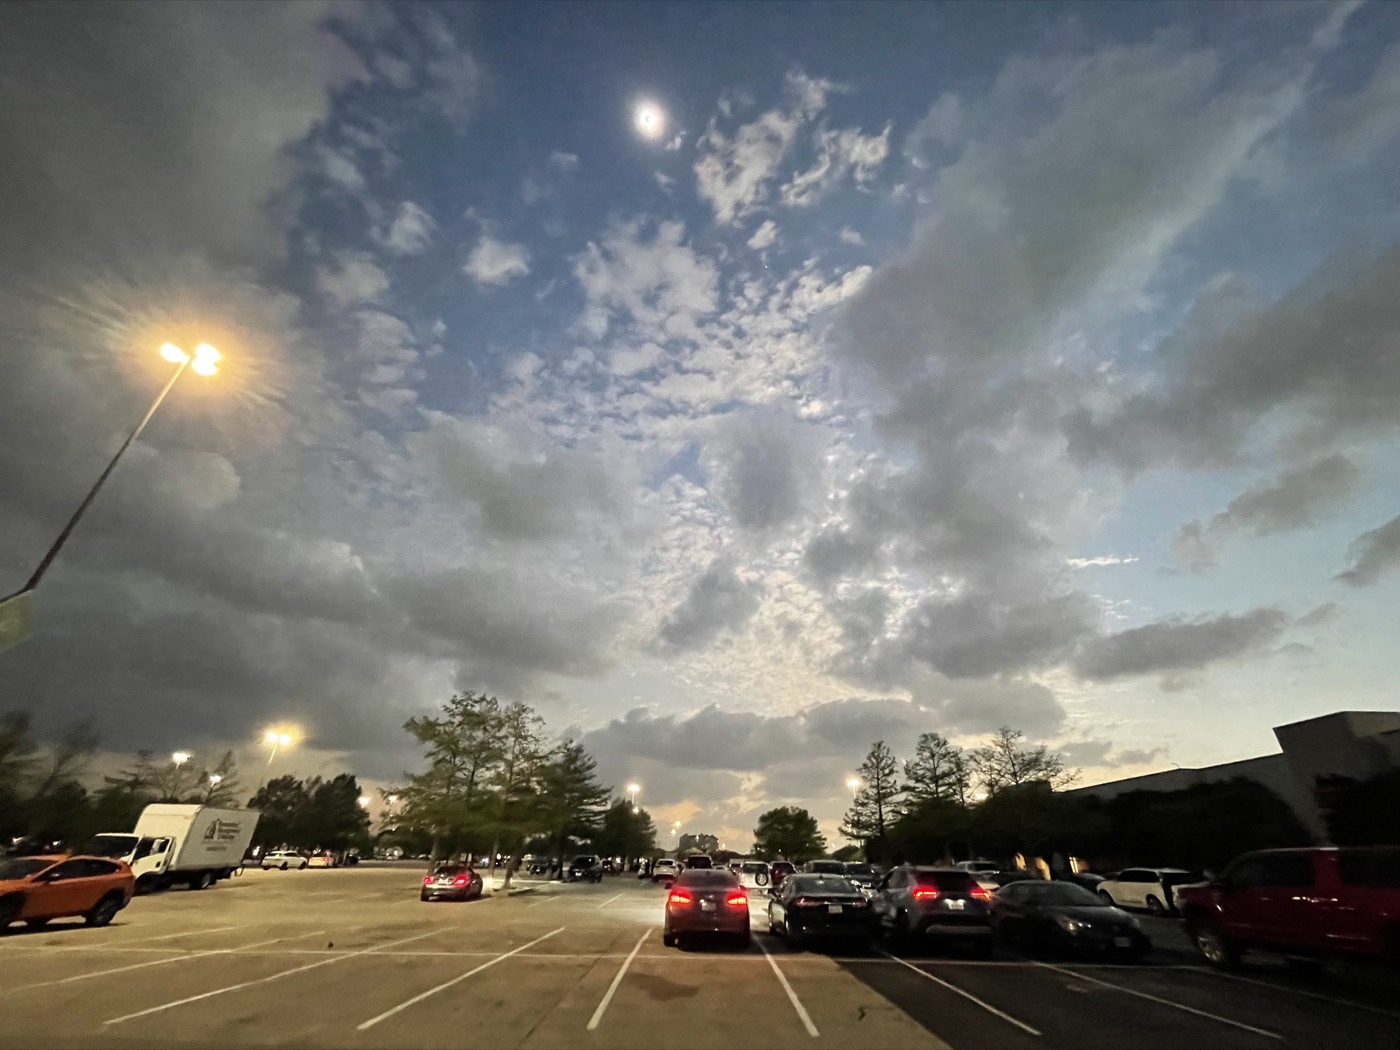 A wide-angle shot of the parking lot we were in during totality.